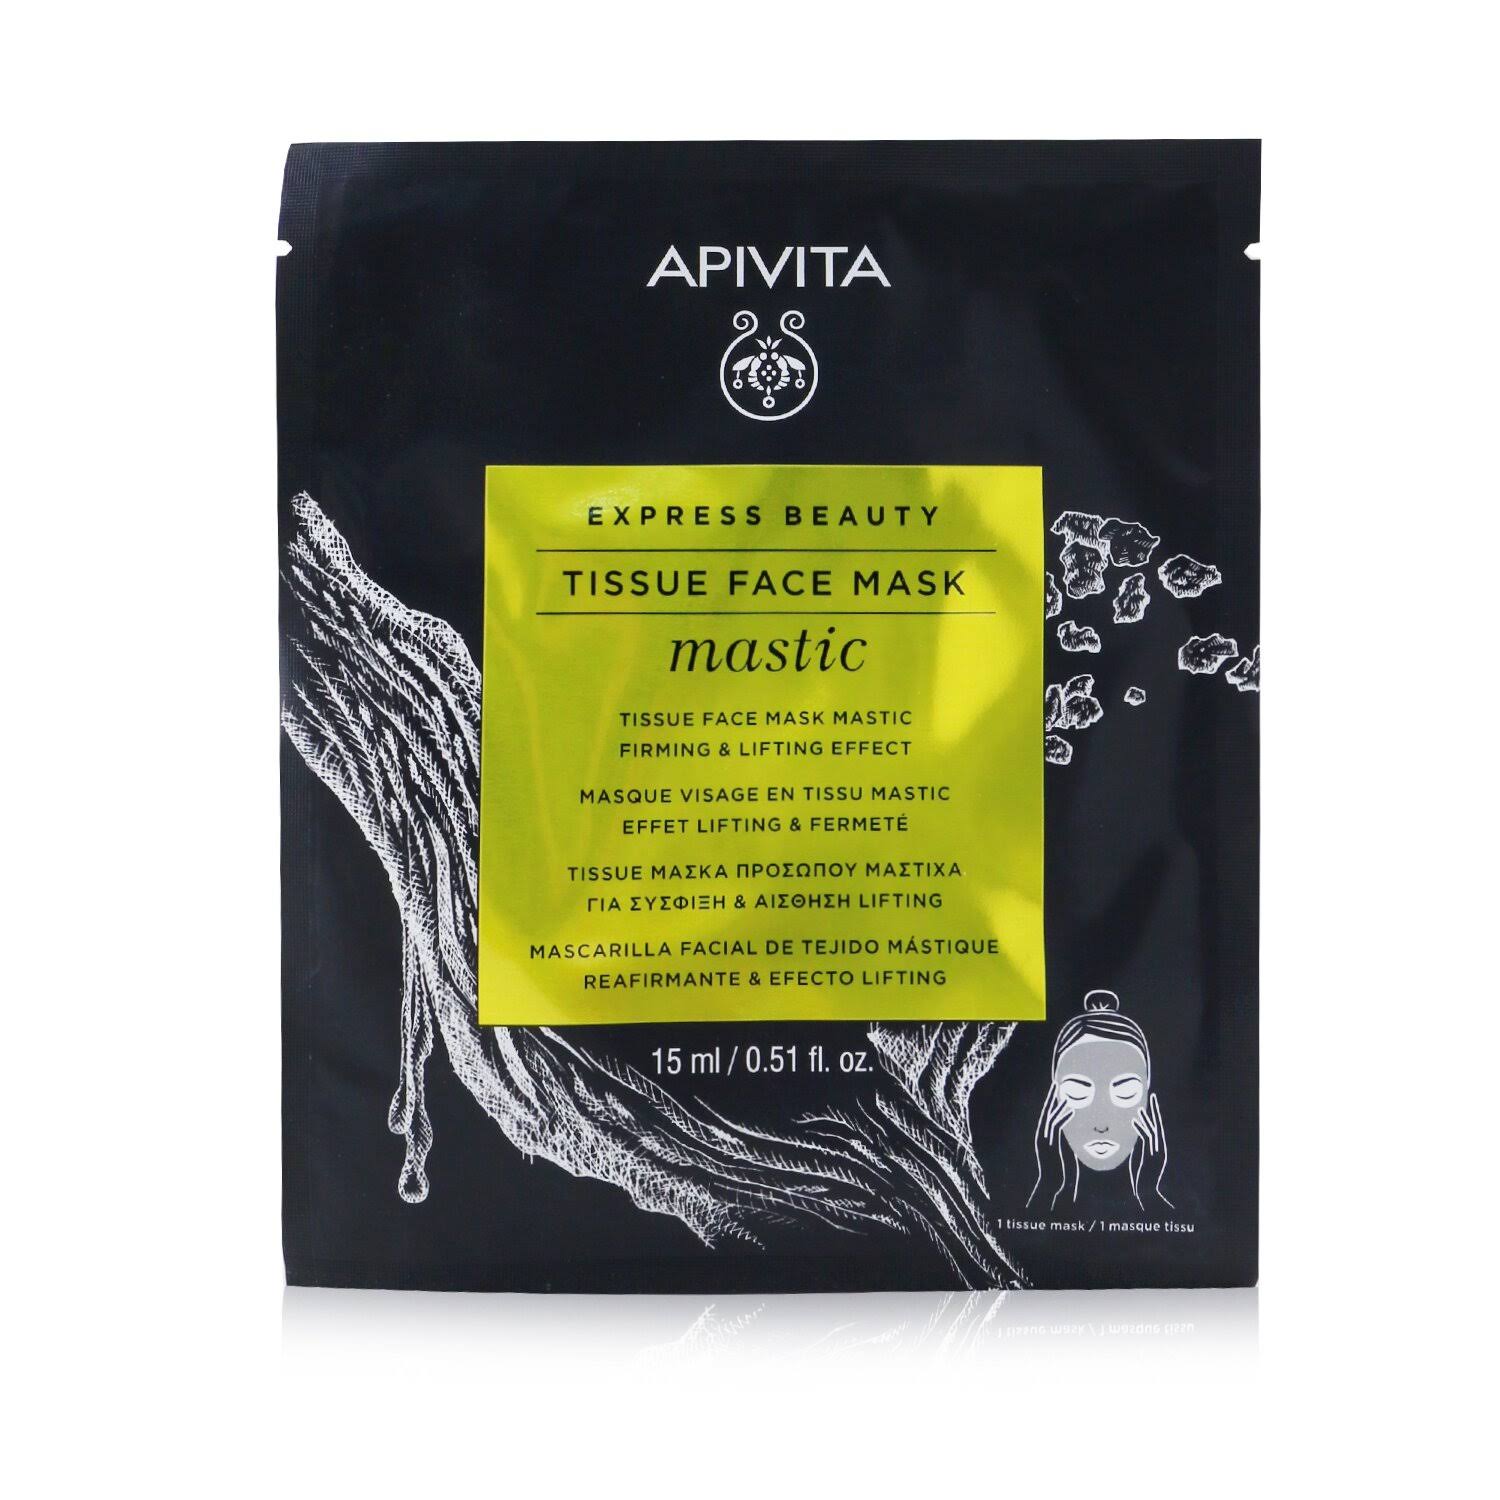 Apivita Express Beauty Tissue Face Mask with Mastic (Firming & Lifting) 6x15ml/0.51oz